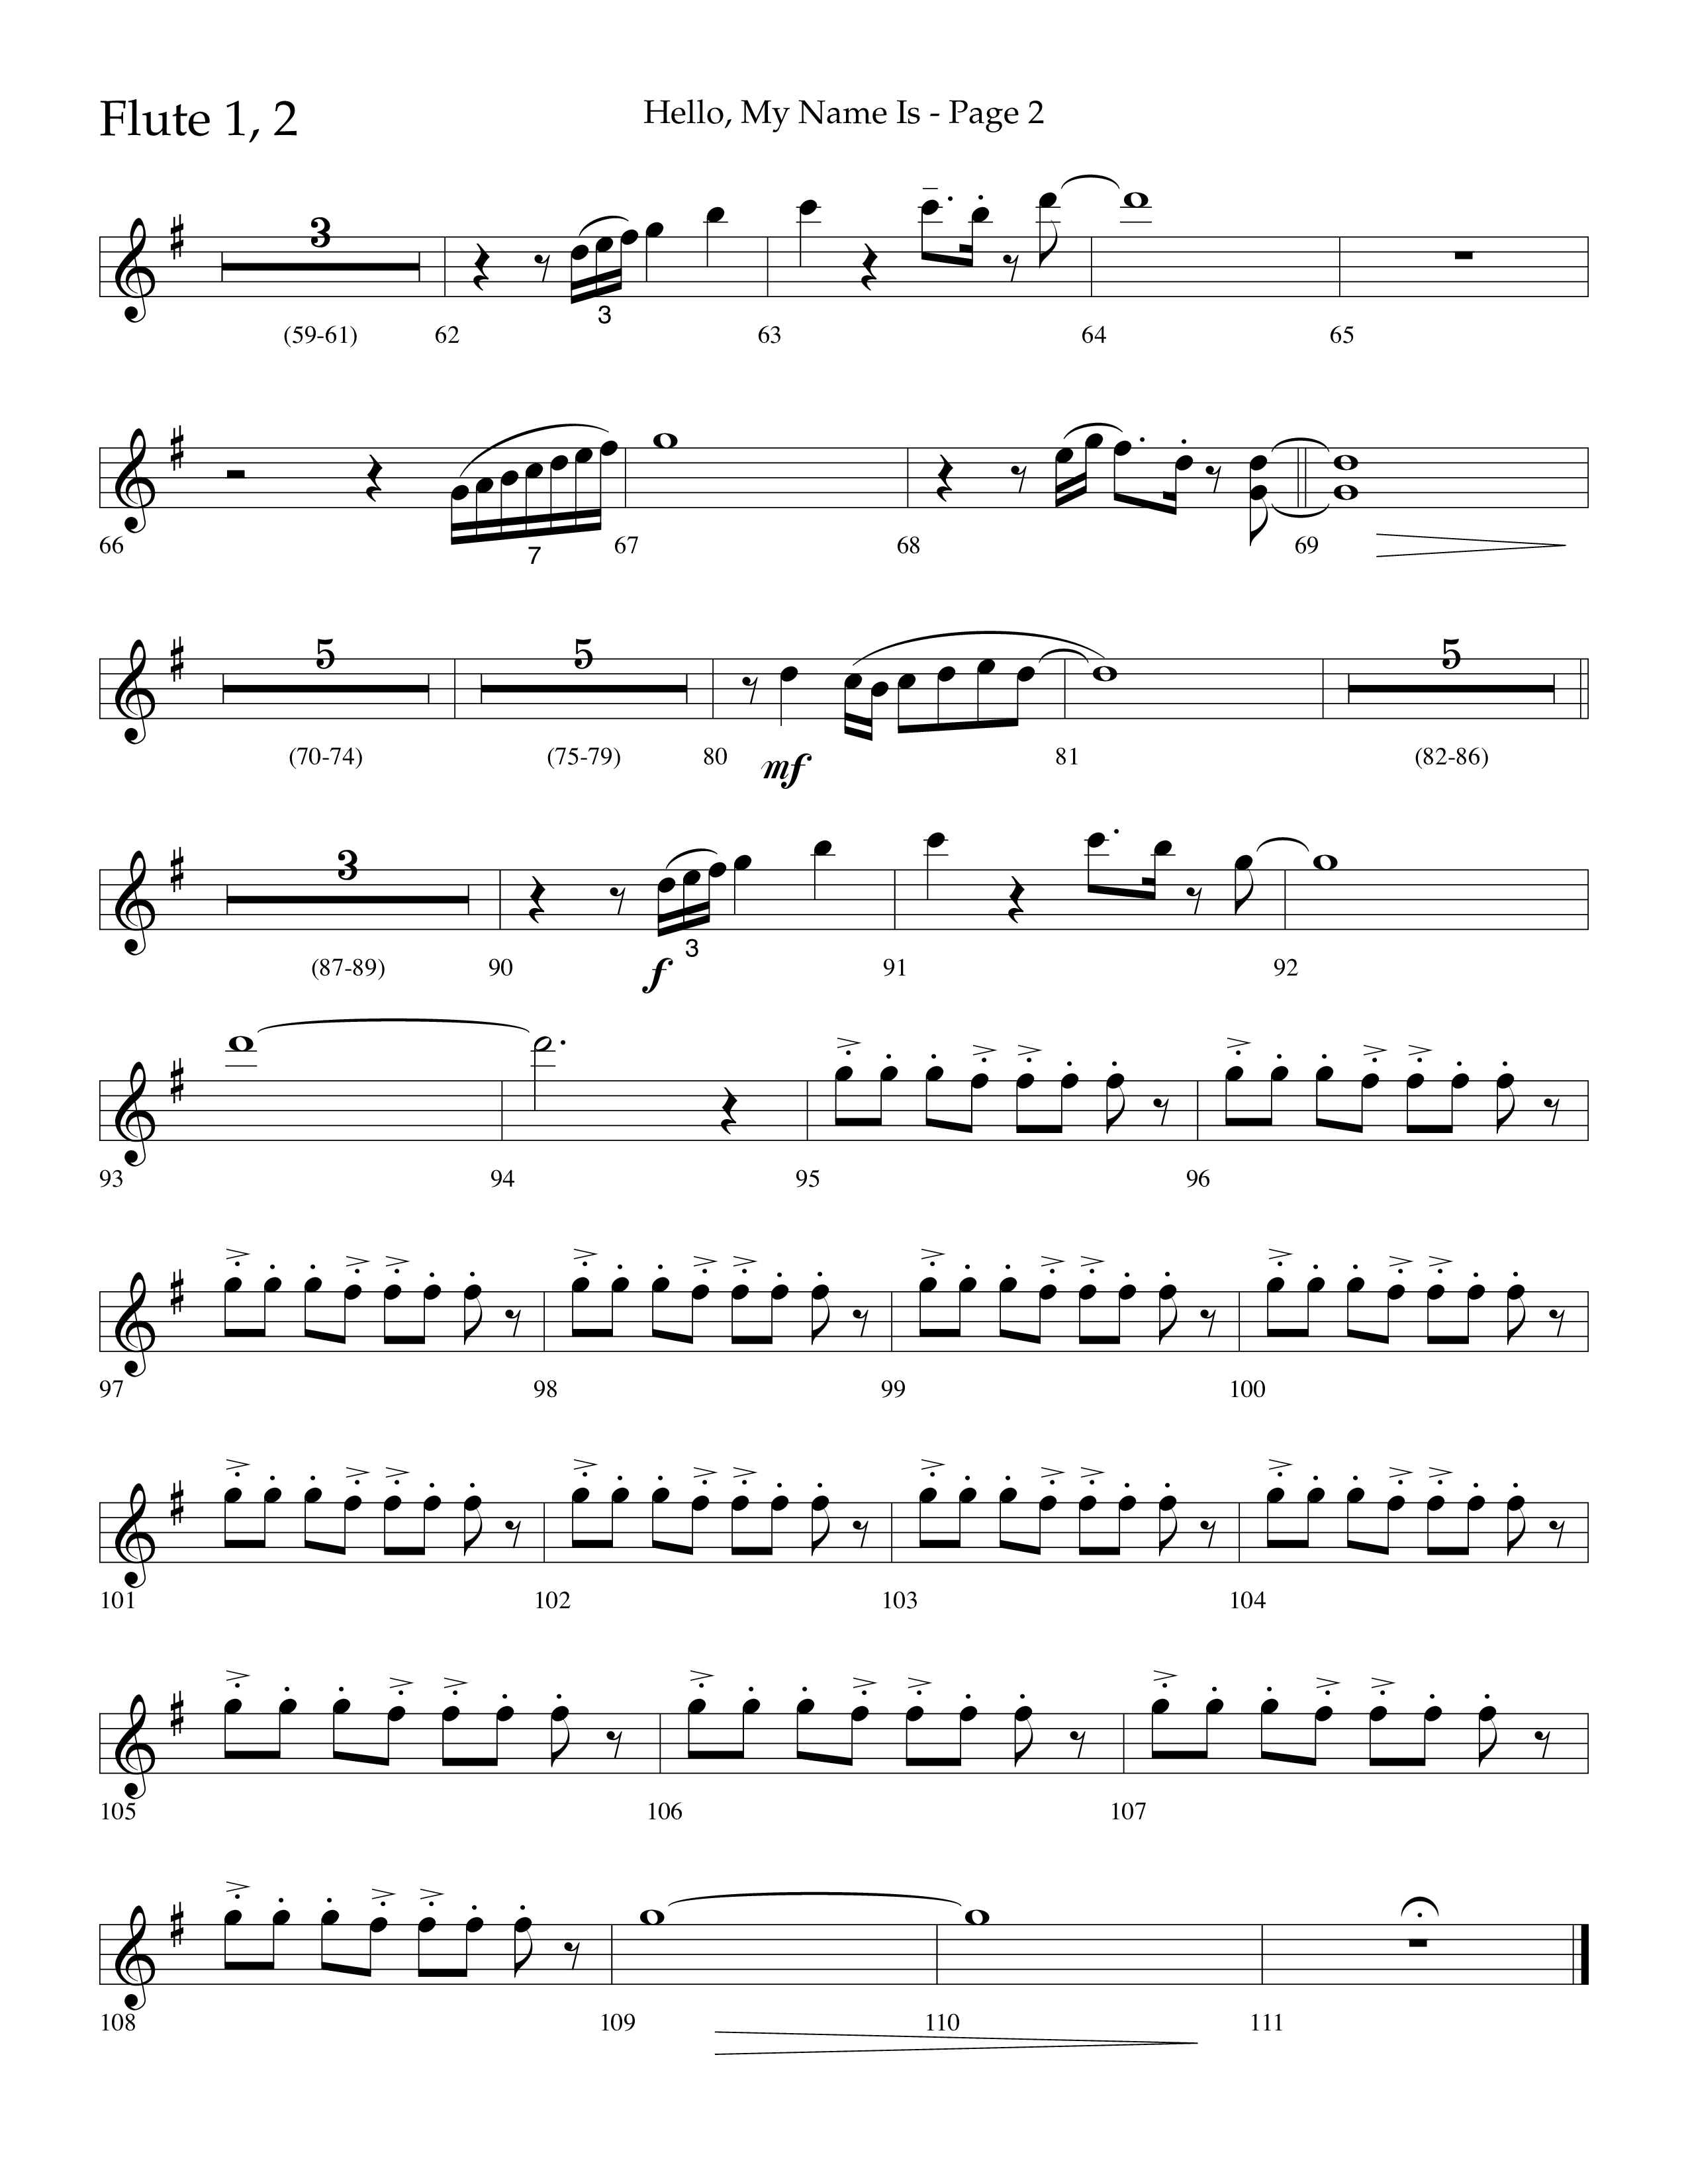 Hello My Name Is (Choral Anthem SATB) Flute 1/2 (Lifeway Choral / Arr. Jim Hammerly)